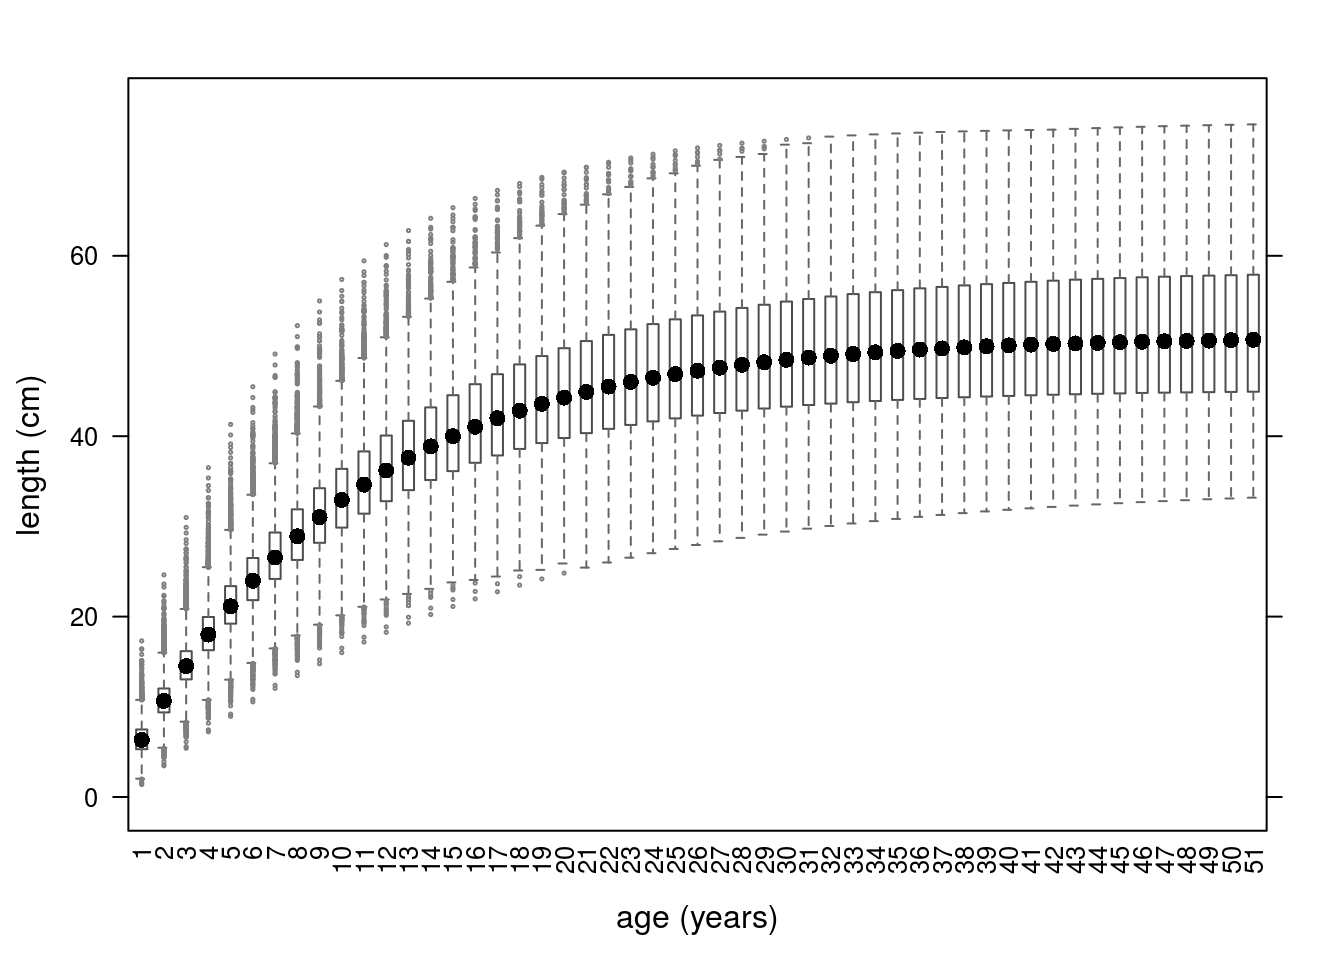 Growth curves using parameters simulated from a multivariate triangle distribution.